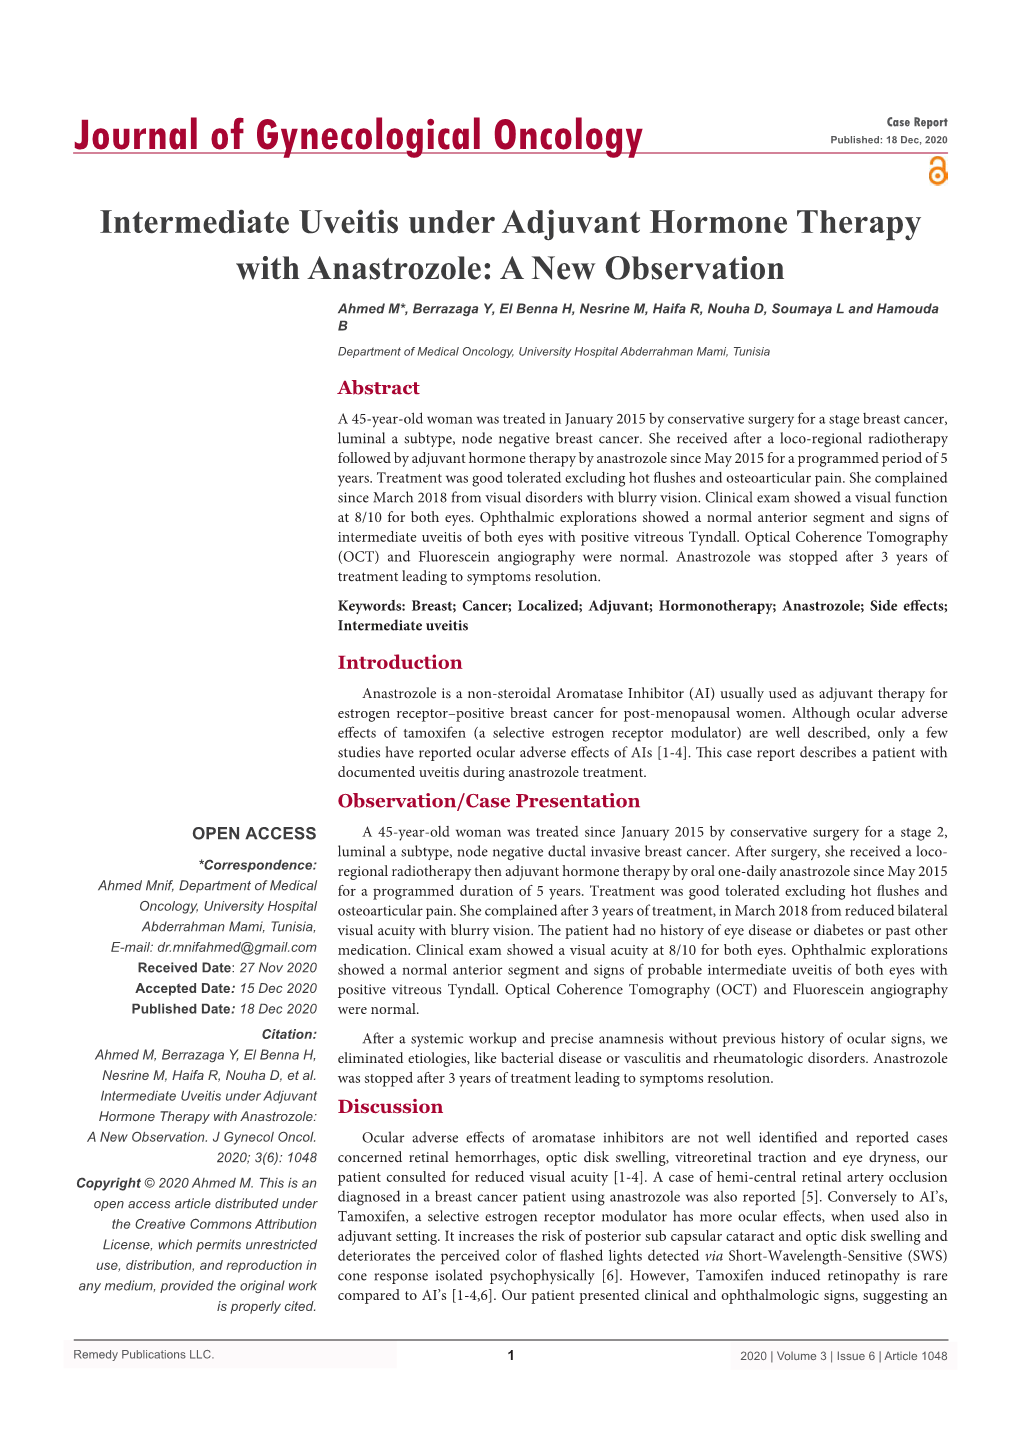 Intermediate Uveitis Under Adjuvant Hormone Therapy with Anastrozole: a New Observation